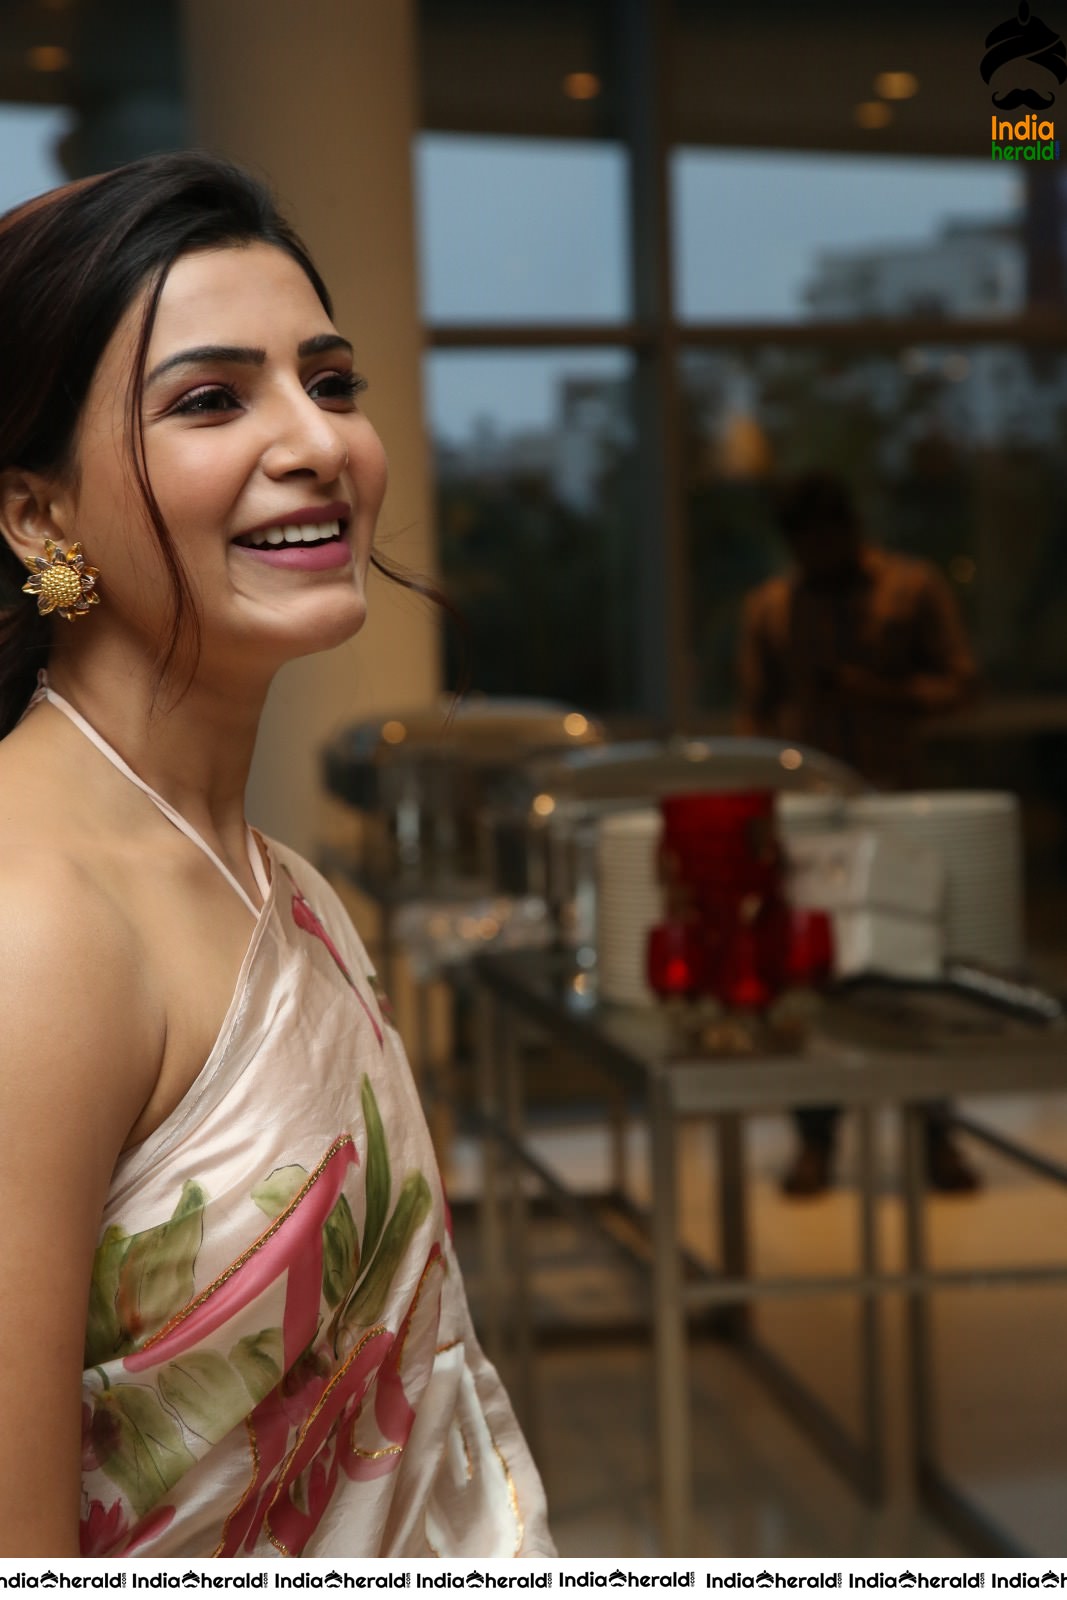 Samantha Akkineni Looking Hot in Saree and Sleeveless Blouse in these Latest Photos